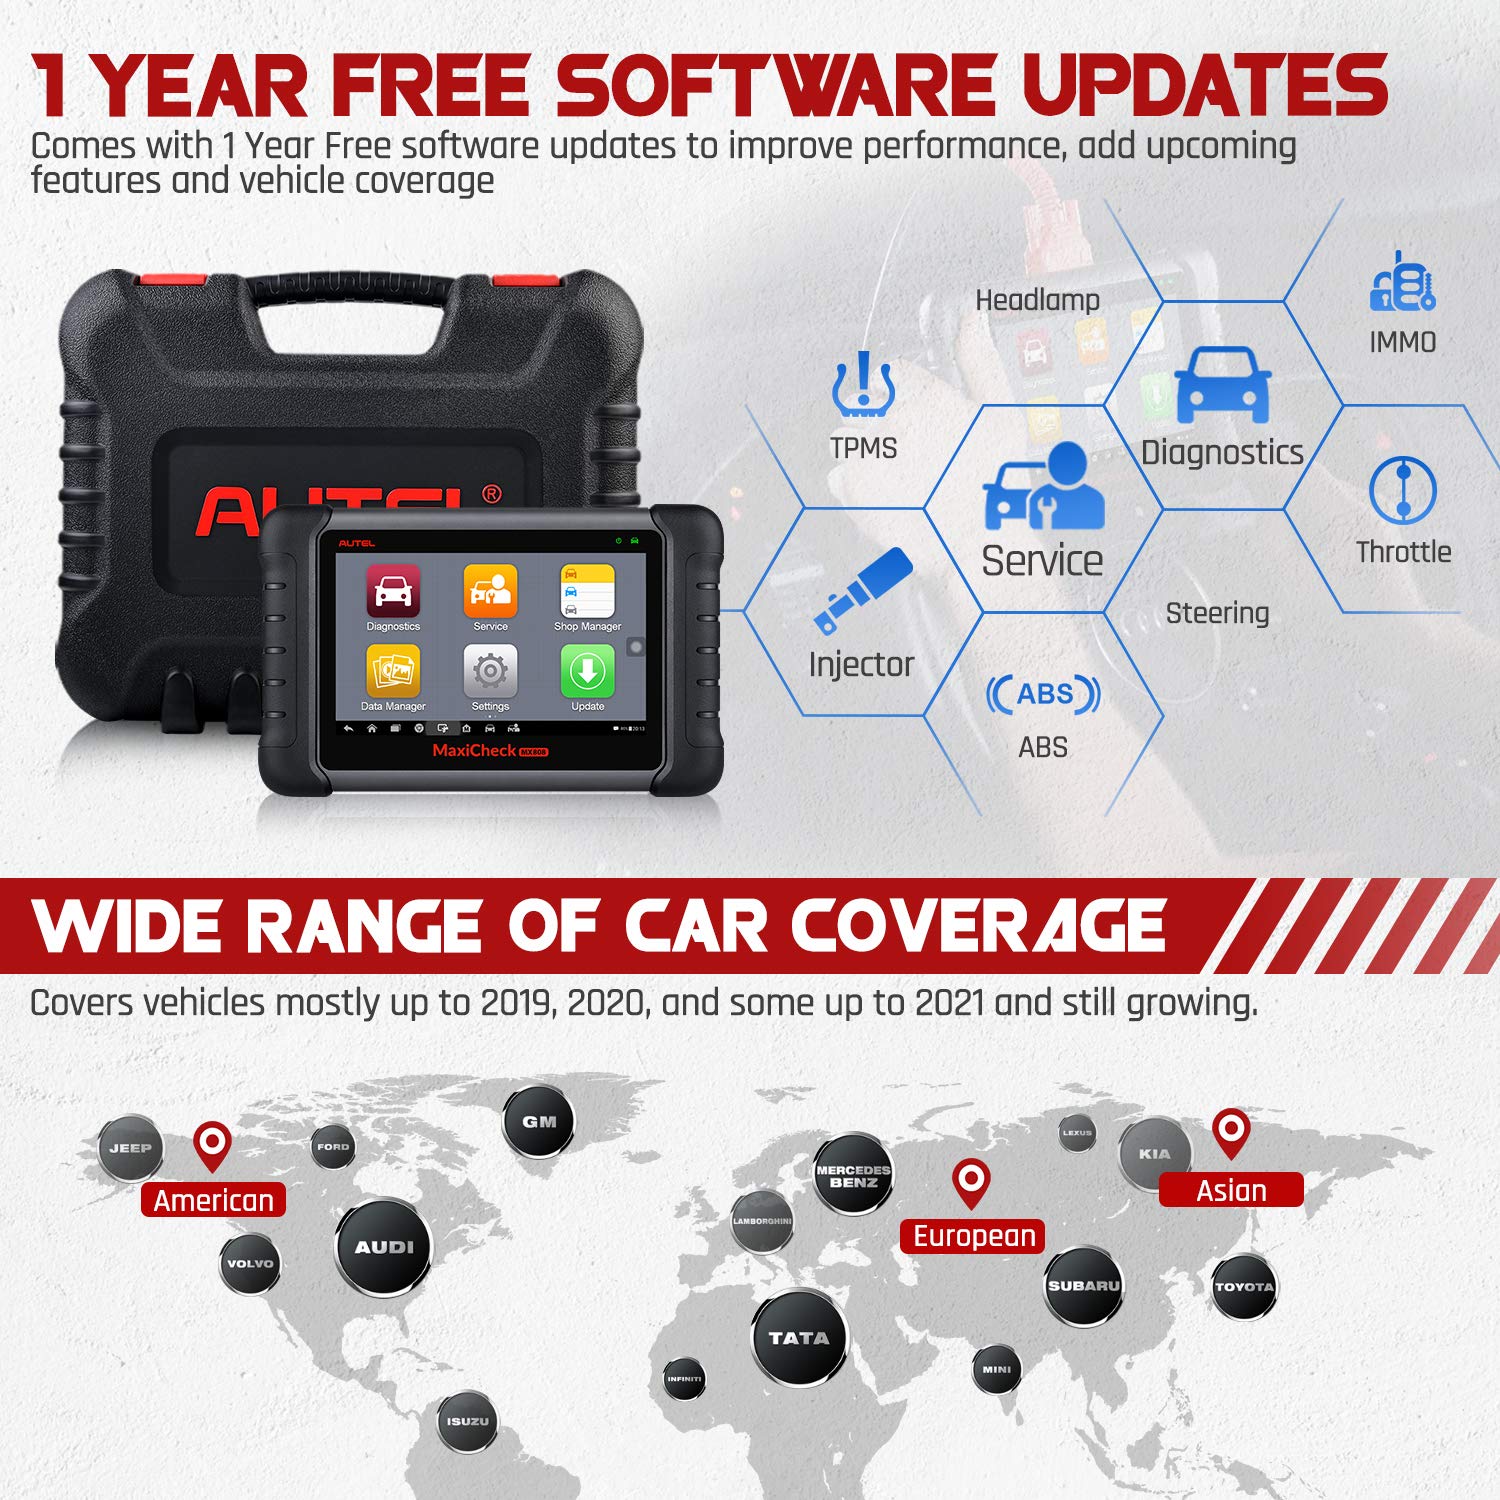 Autel MX808 Scanner Come with 1-year update and 80+ makes & models car coverage